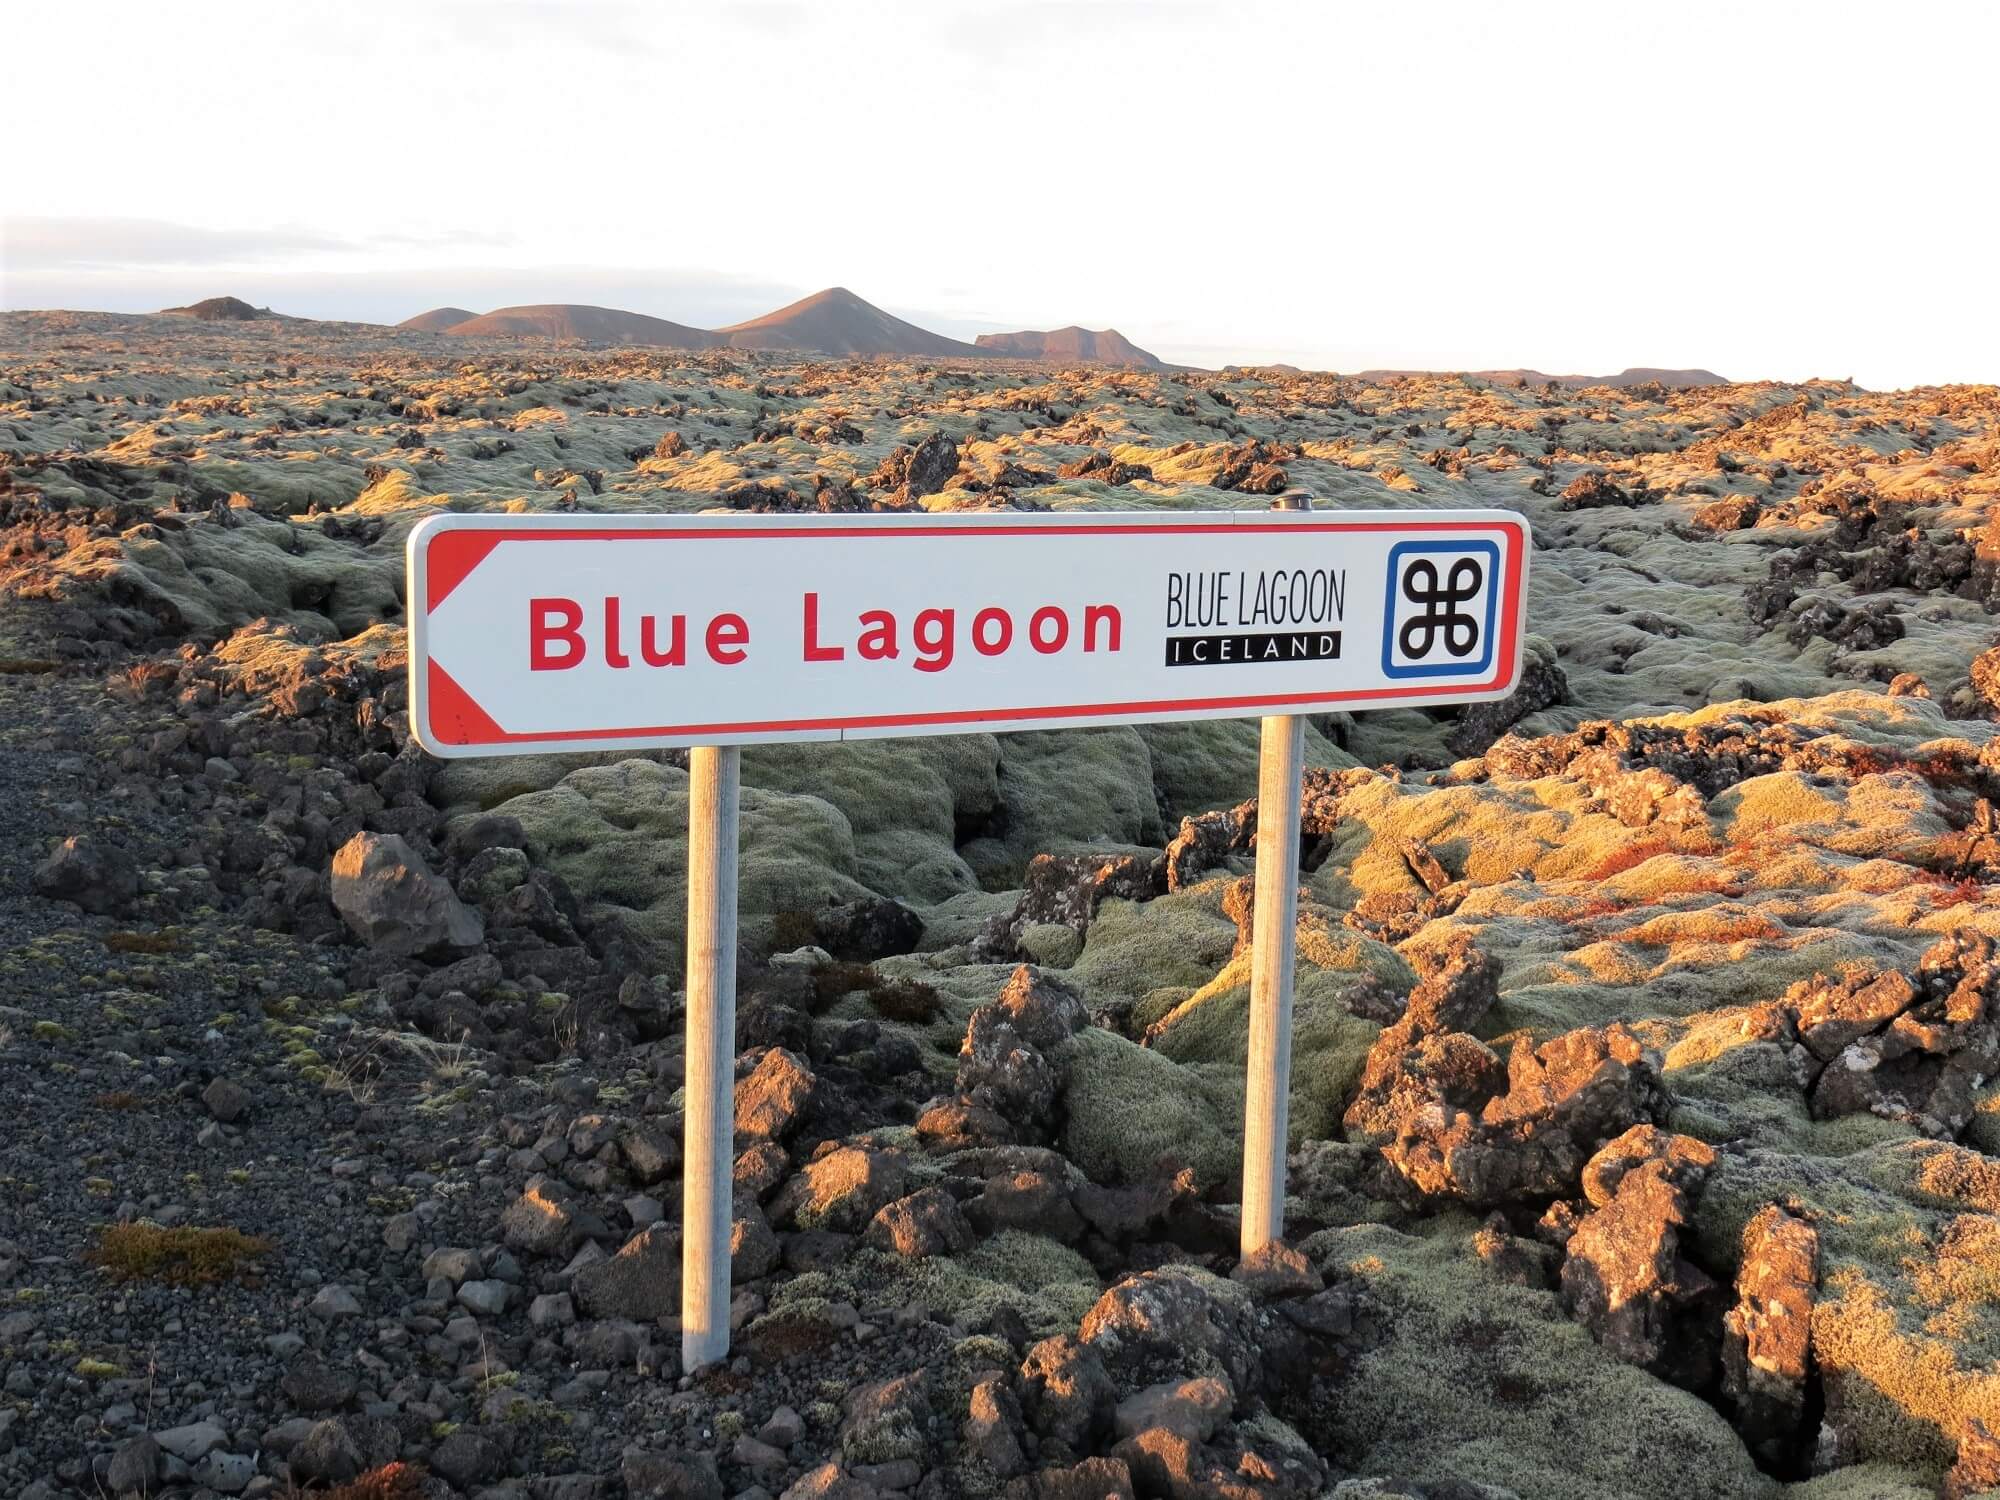 Buses to and from Keflavik airport and the Blue Lagoon on Iceland